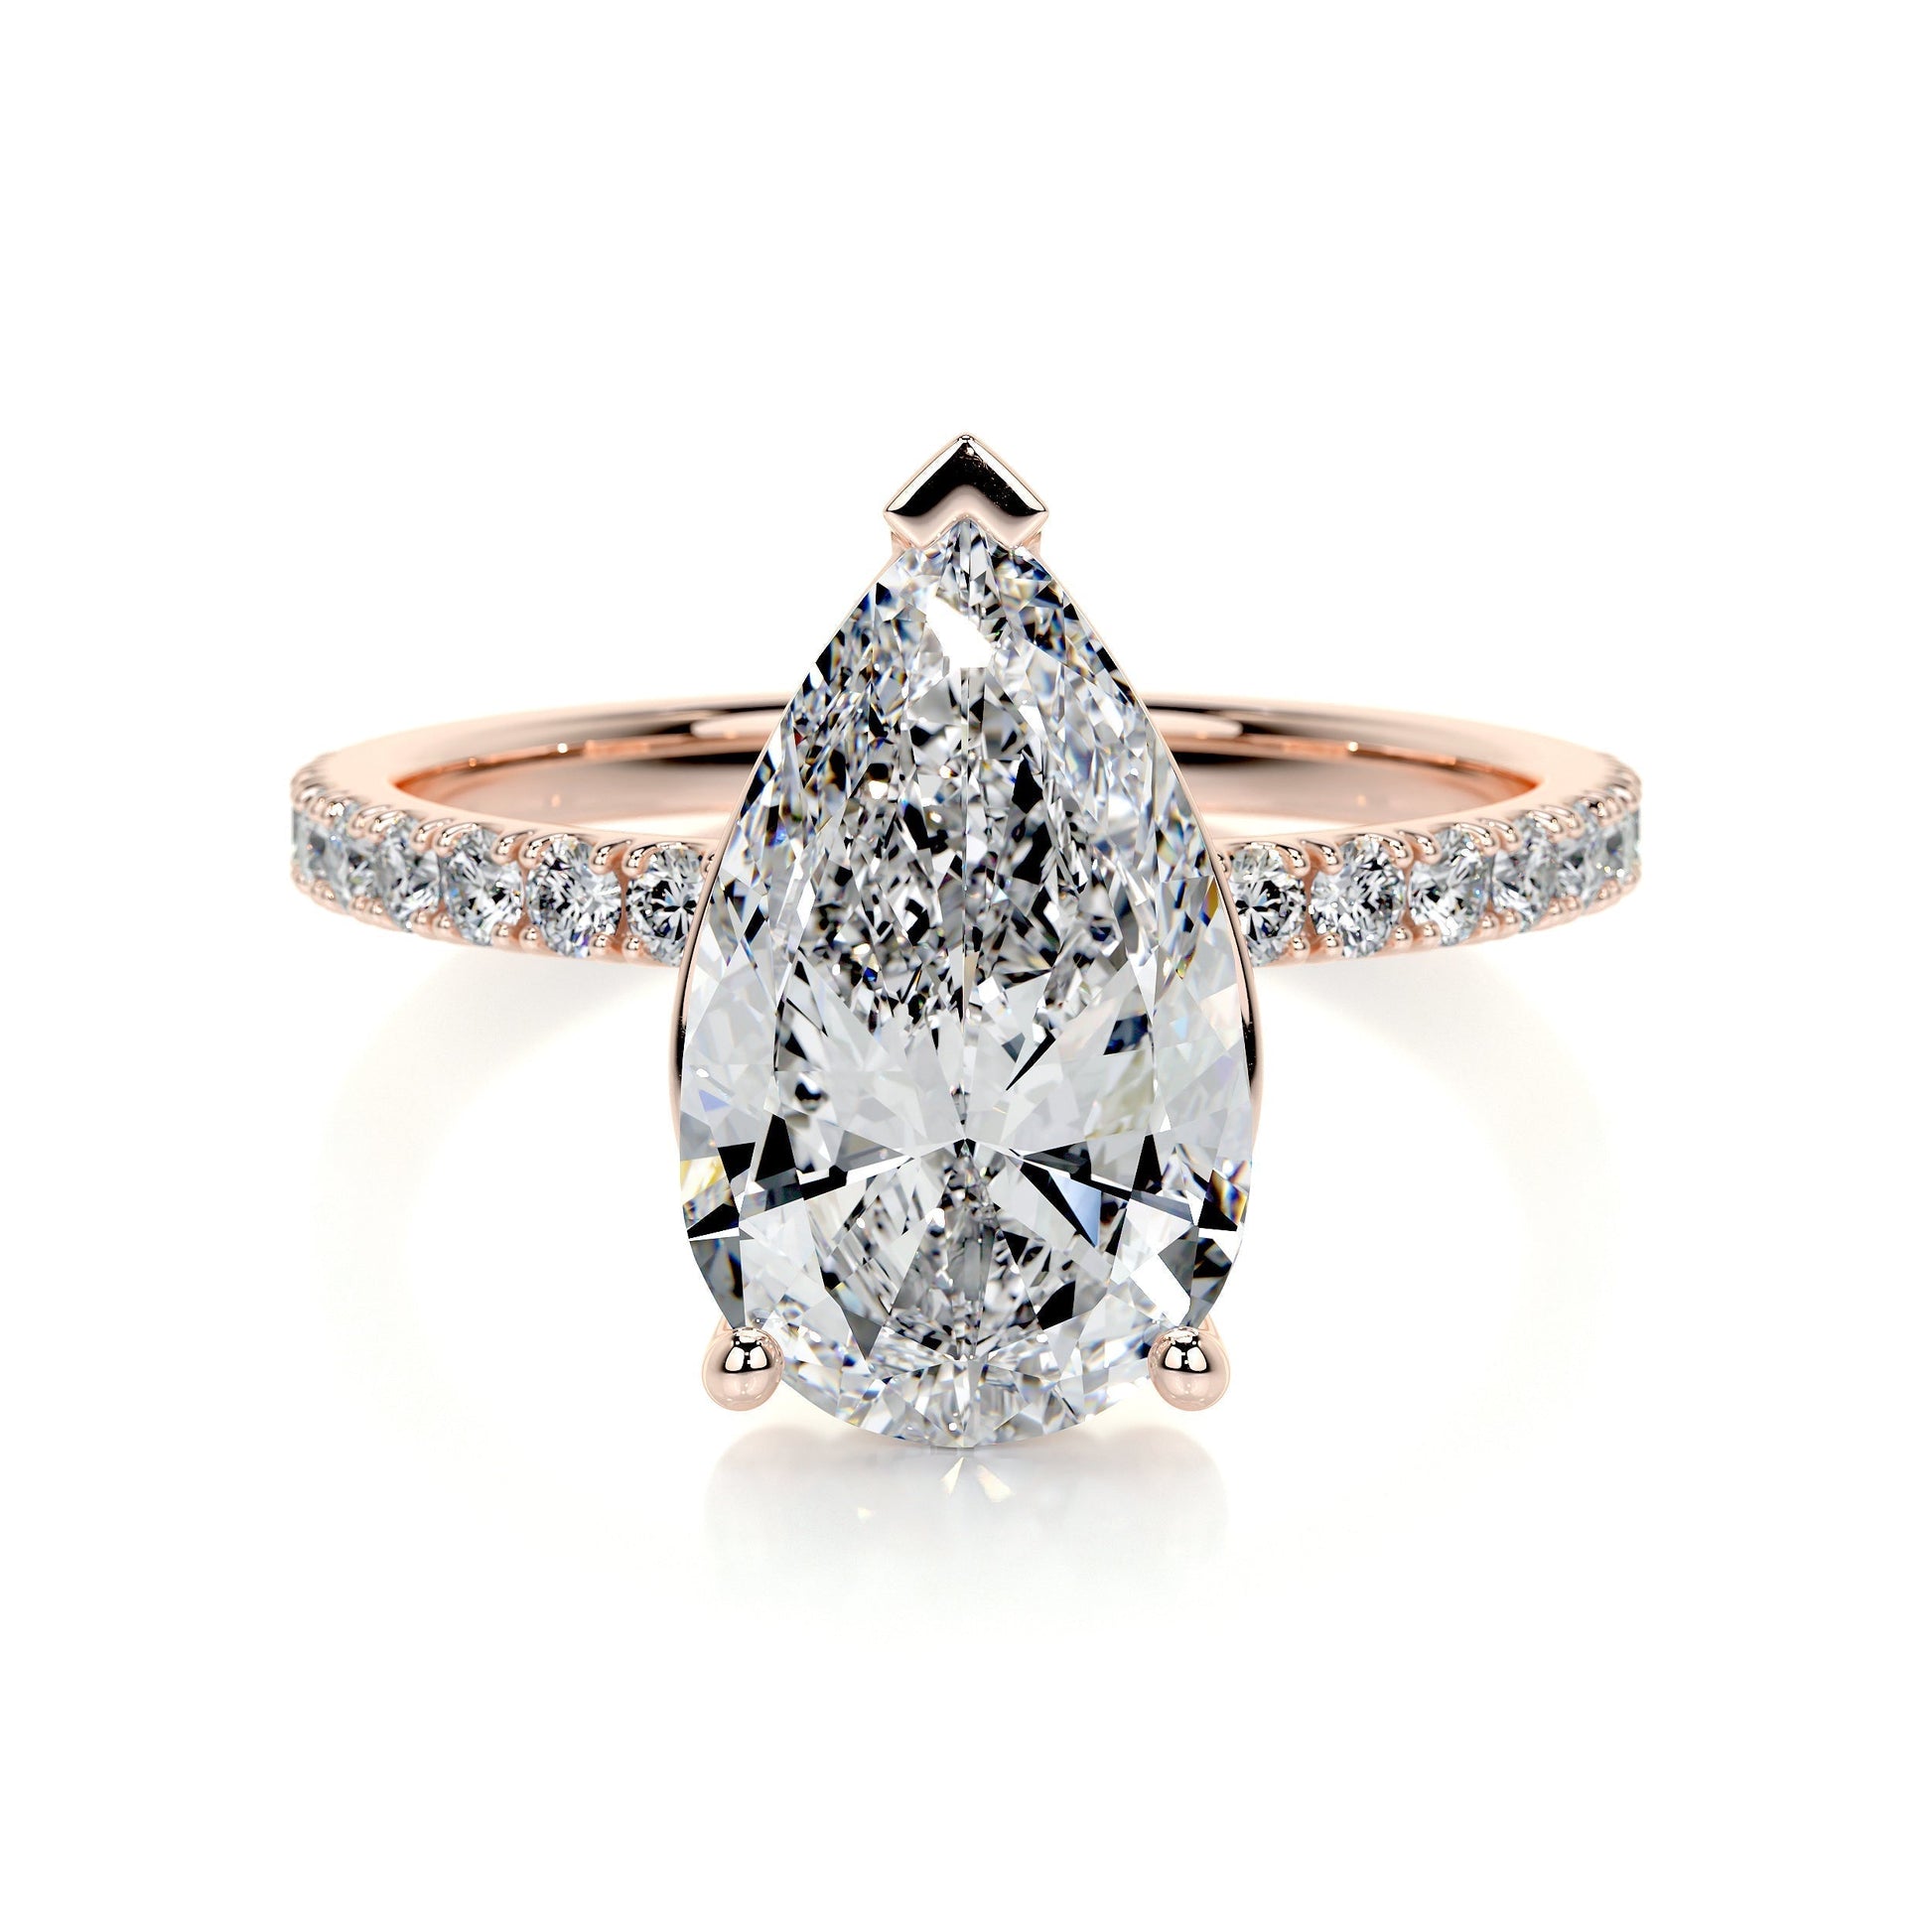 5.0 CT Pear Solitaire CVD F/VS2 Diamond Engagement Ring 13